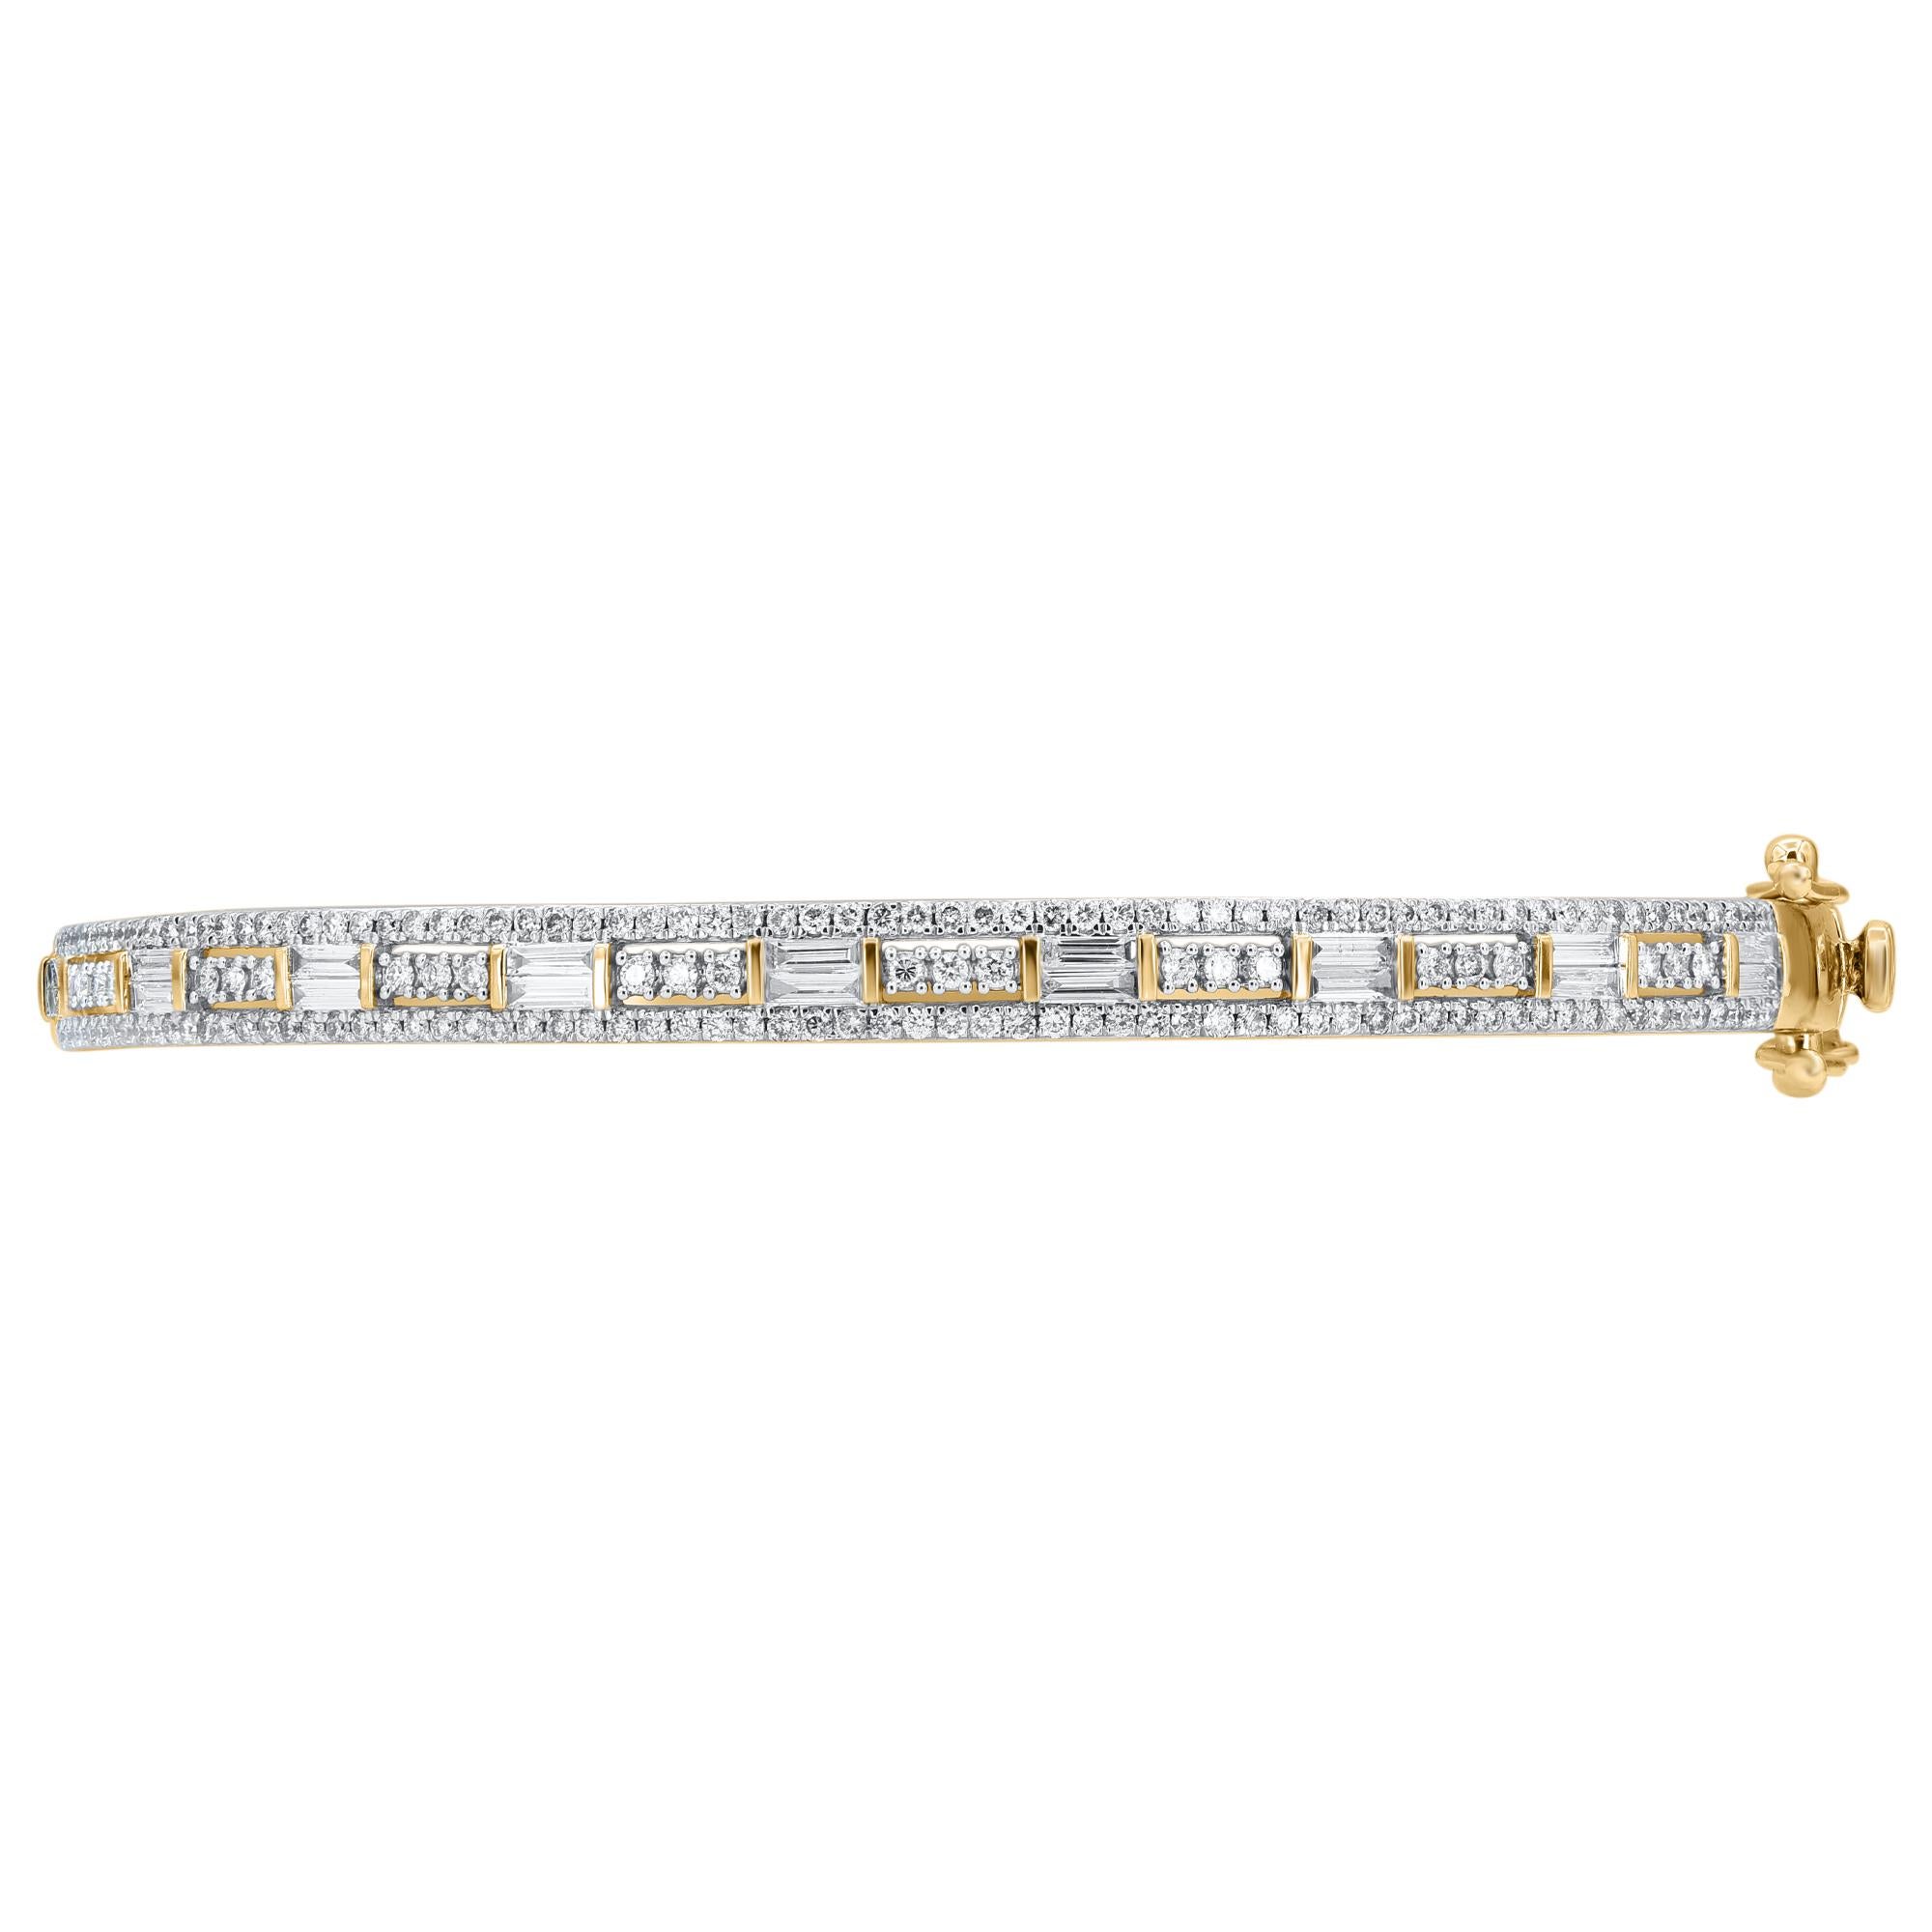 Add a touch of sparkle to any look with this sleek diamond bangle bracelet. This Shimmering bangle features 180 natural Brilliant Cut, Single Cut & Baguette diamonds set in prong and Channel setting and crafted in 18kt yellow gold. Diamonds are